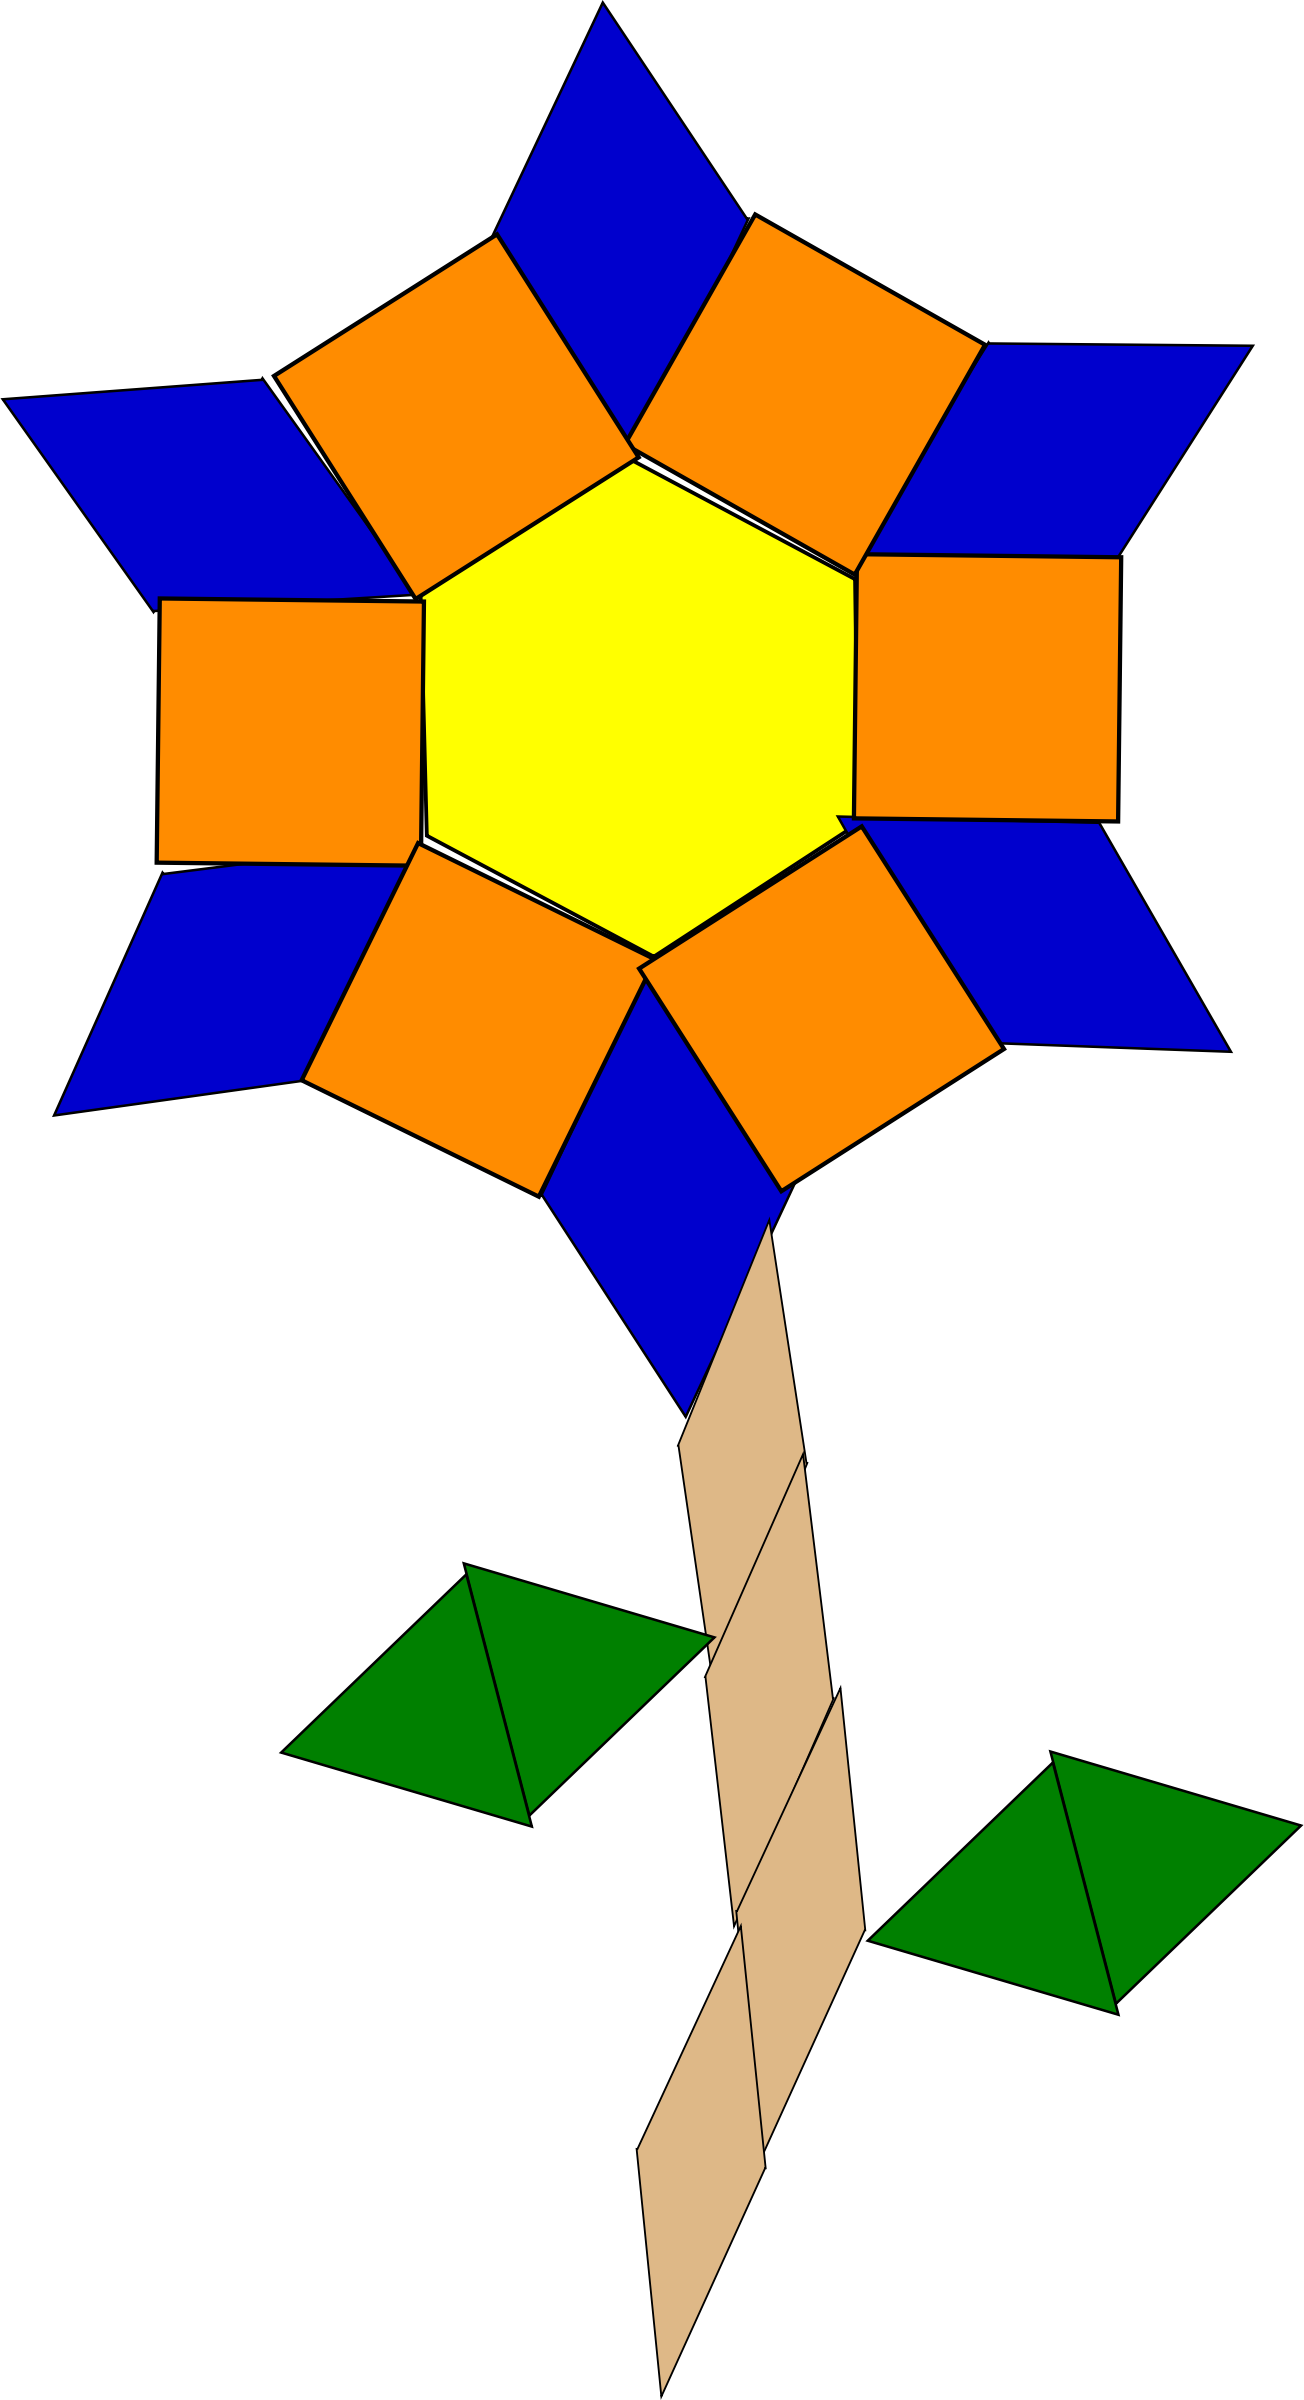 Flowers By @honylakiray, A Geometric Flower, On @openclipart - Flower Made Of Shapes (1304x2400)